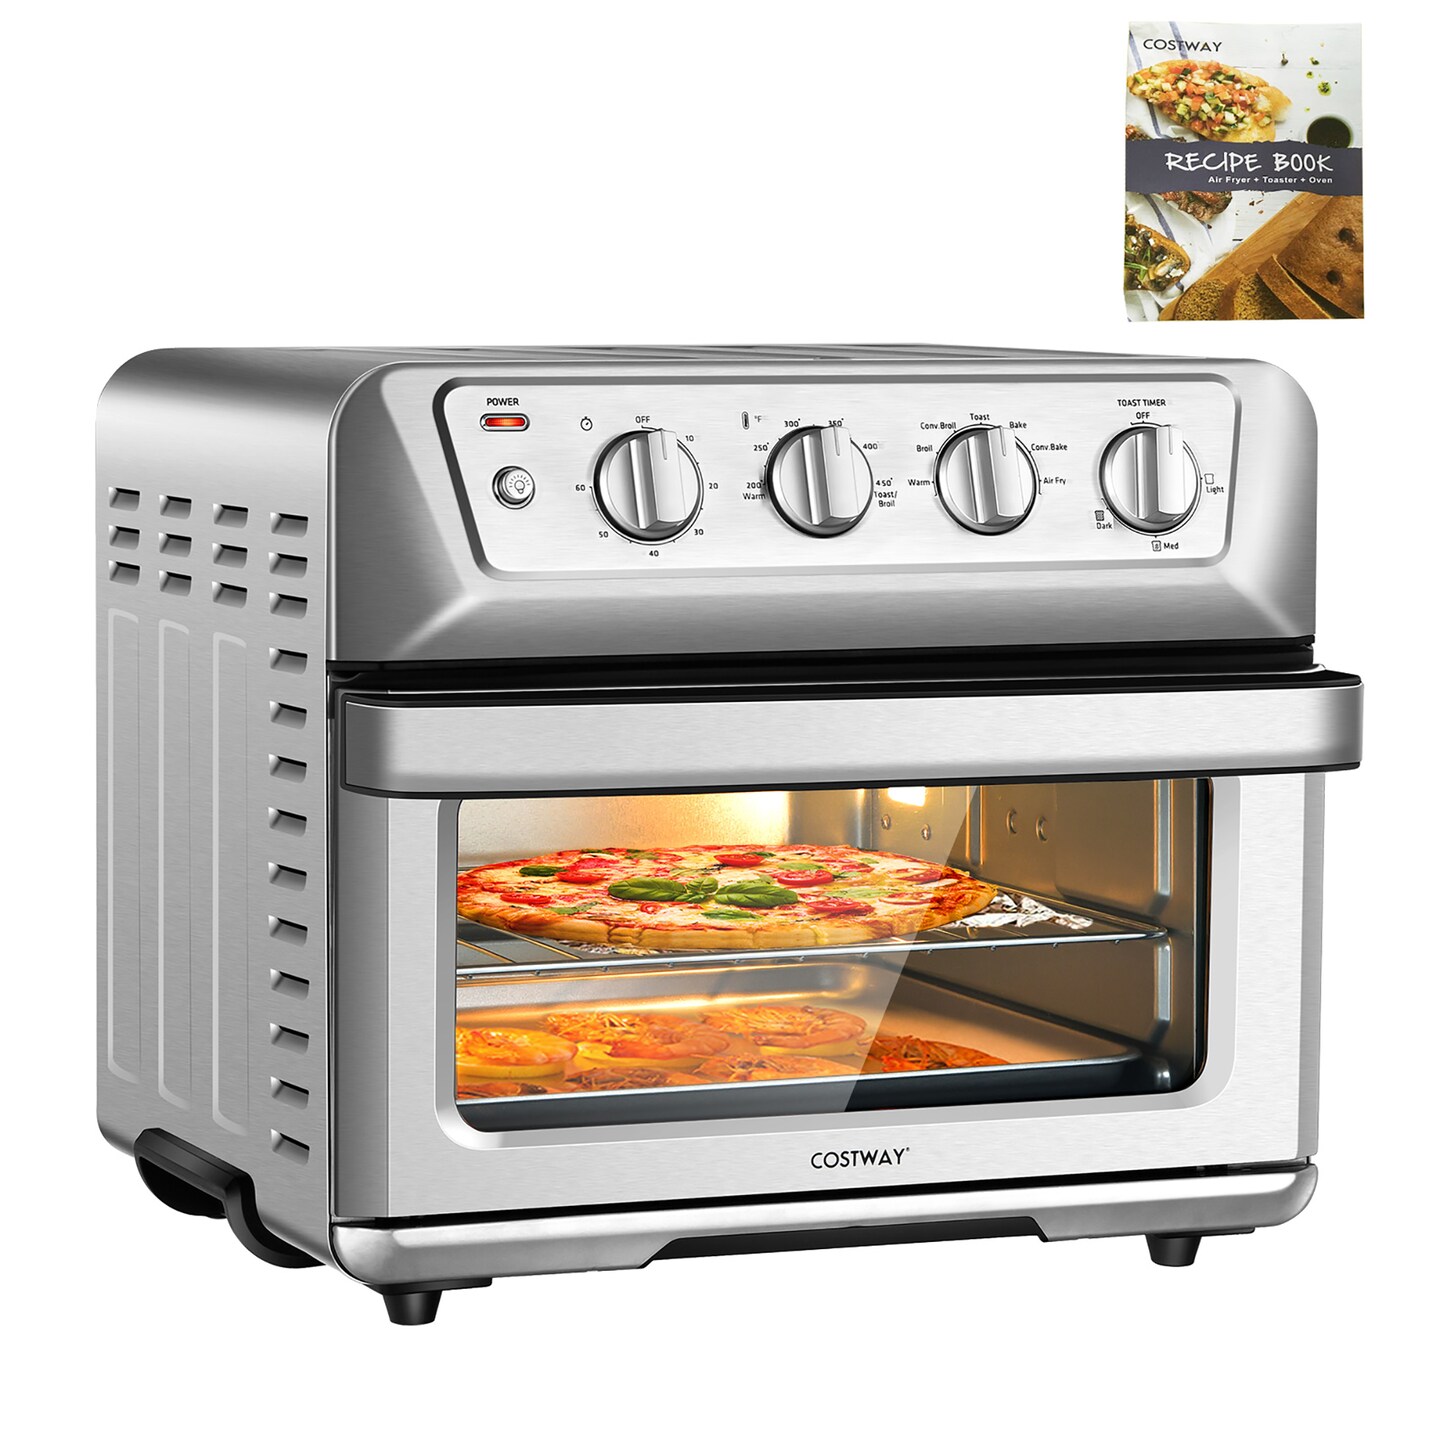 11 Liter Air Fryer Oven with Rotisserie and Rotating Basket - Bed Bath &  Beyond - 37250966